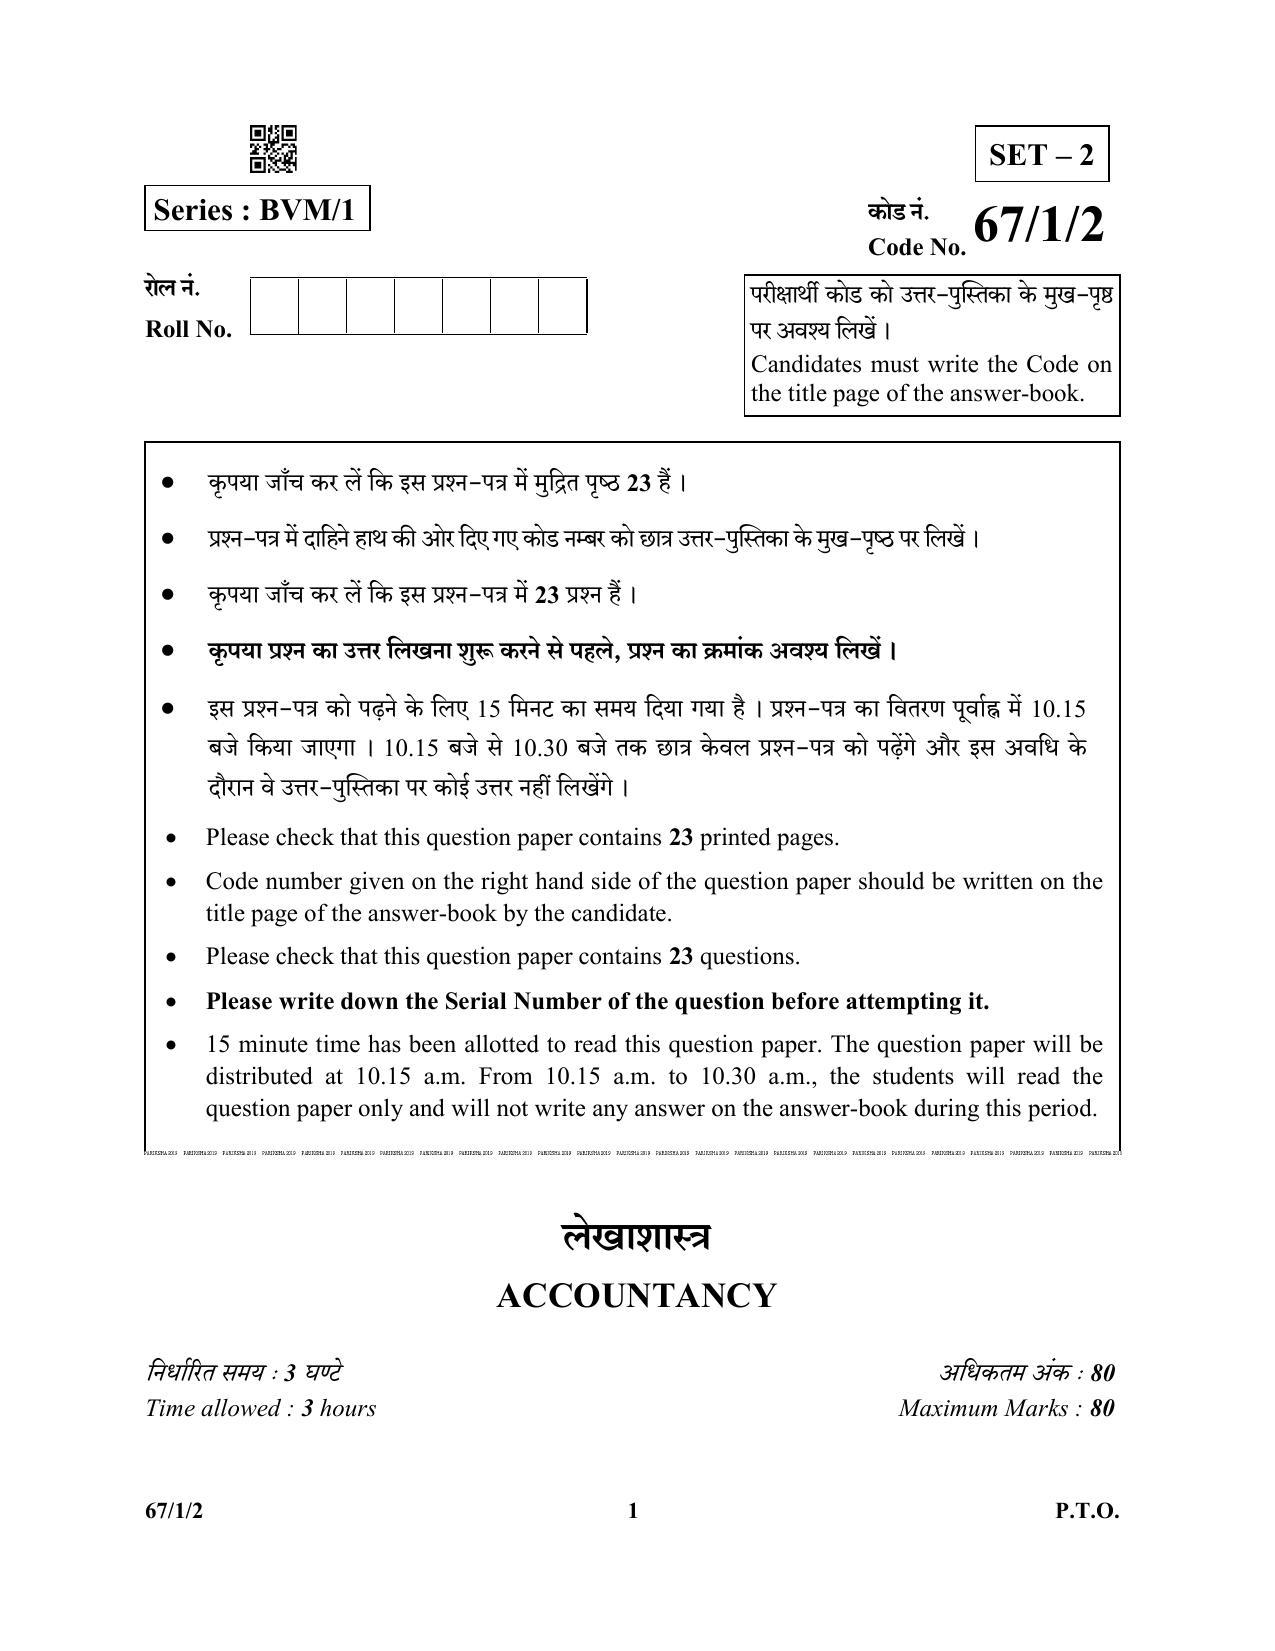 CBSE Class 12 67-1-2  (Accountancy) 2019 Question Paper - Page 1